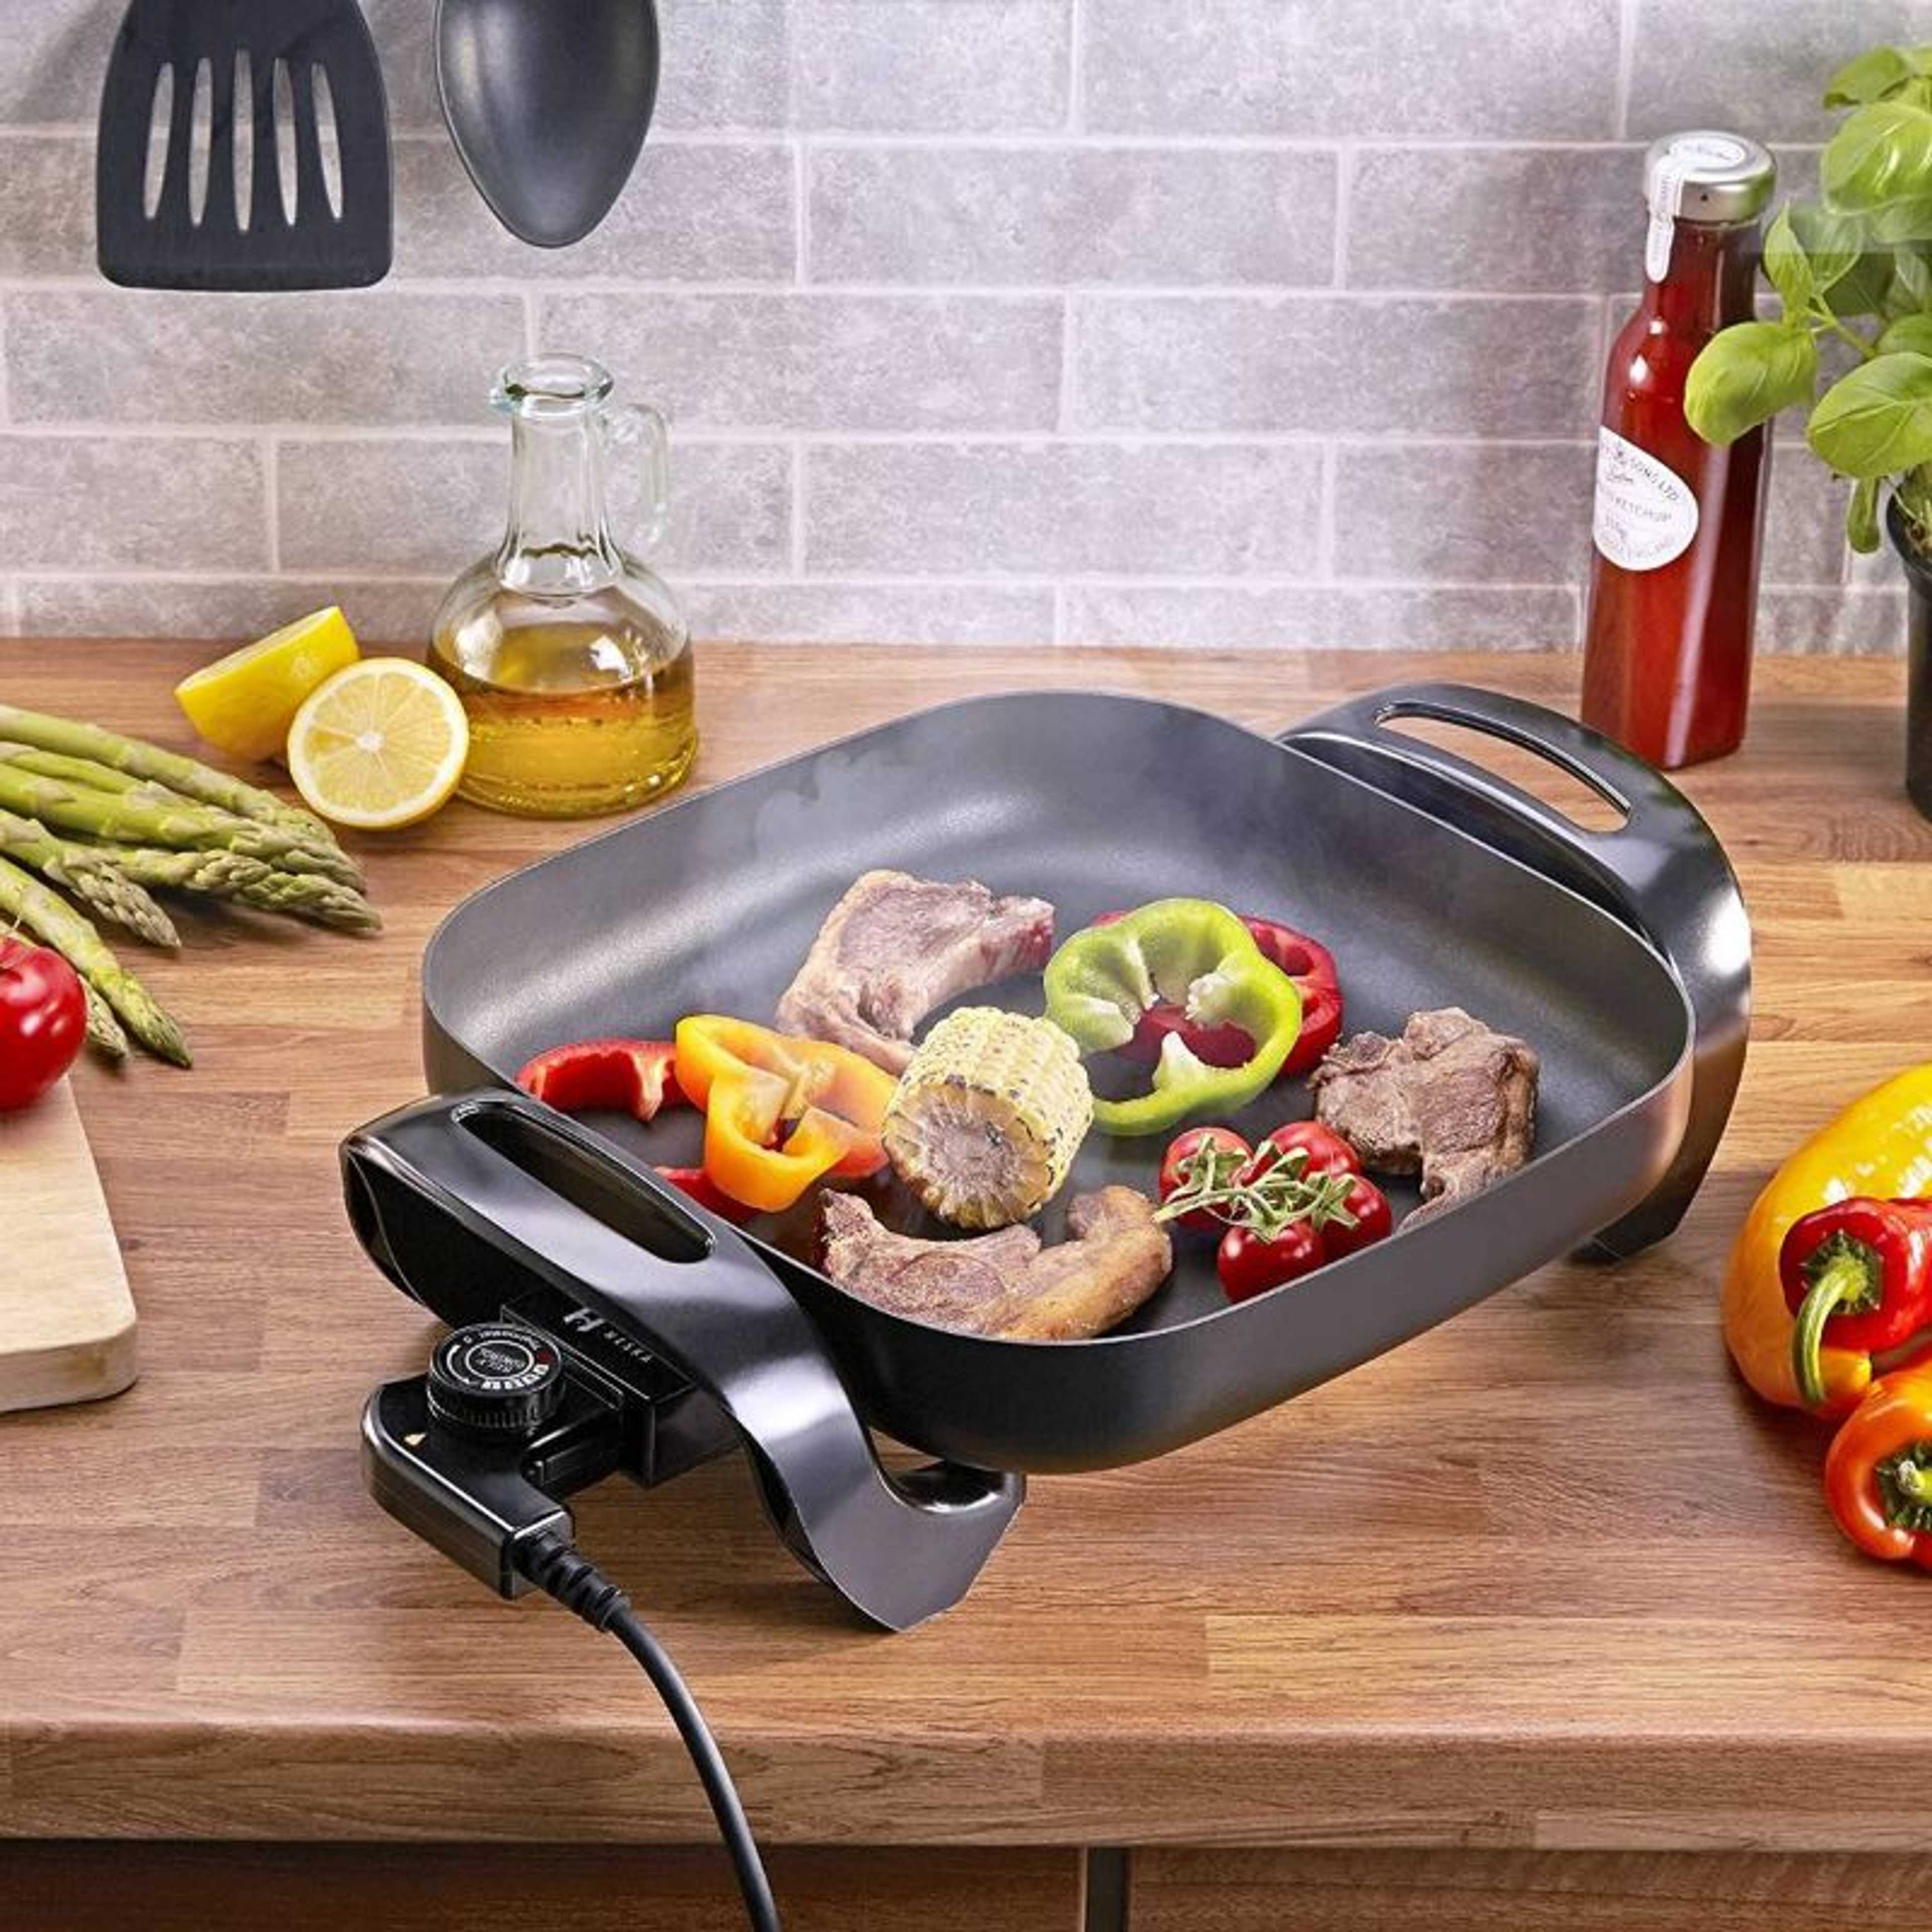 Multifunctional Non-Stick Surface Electric Cooker Frying Pan With Lid and Carry Handles